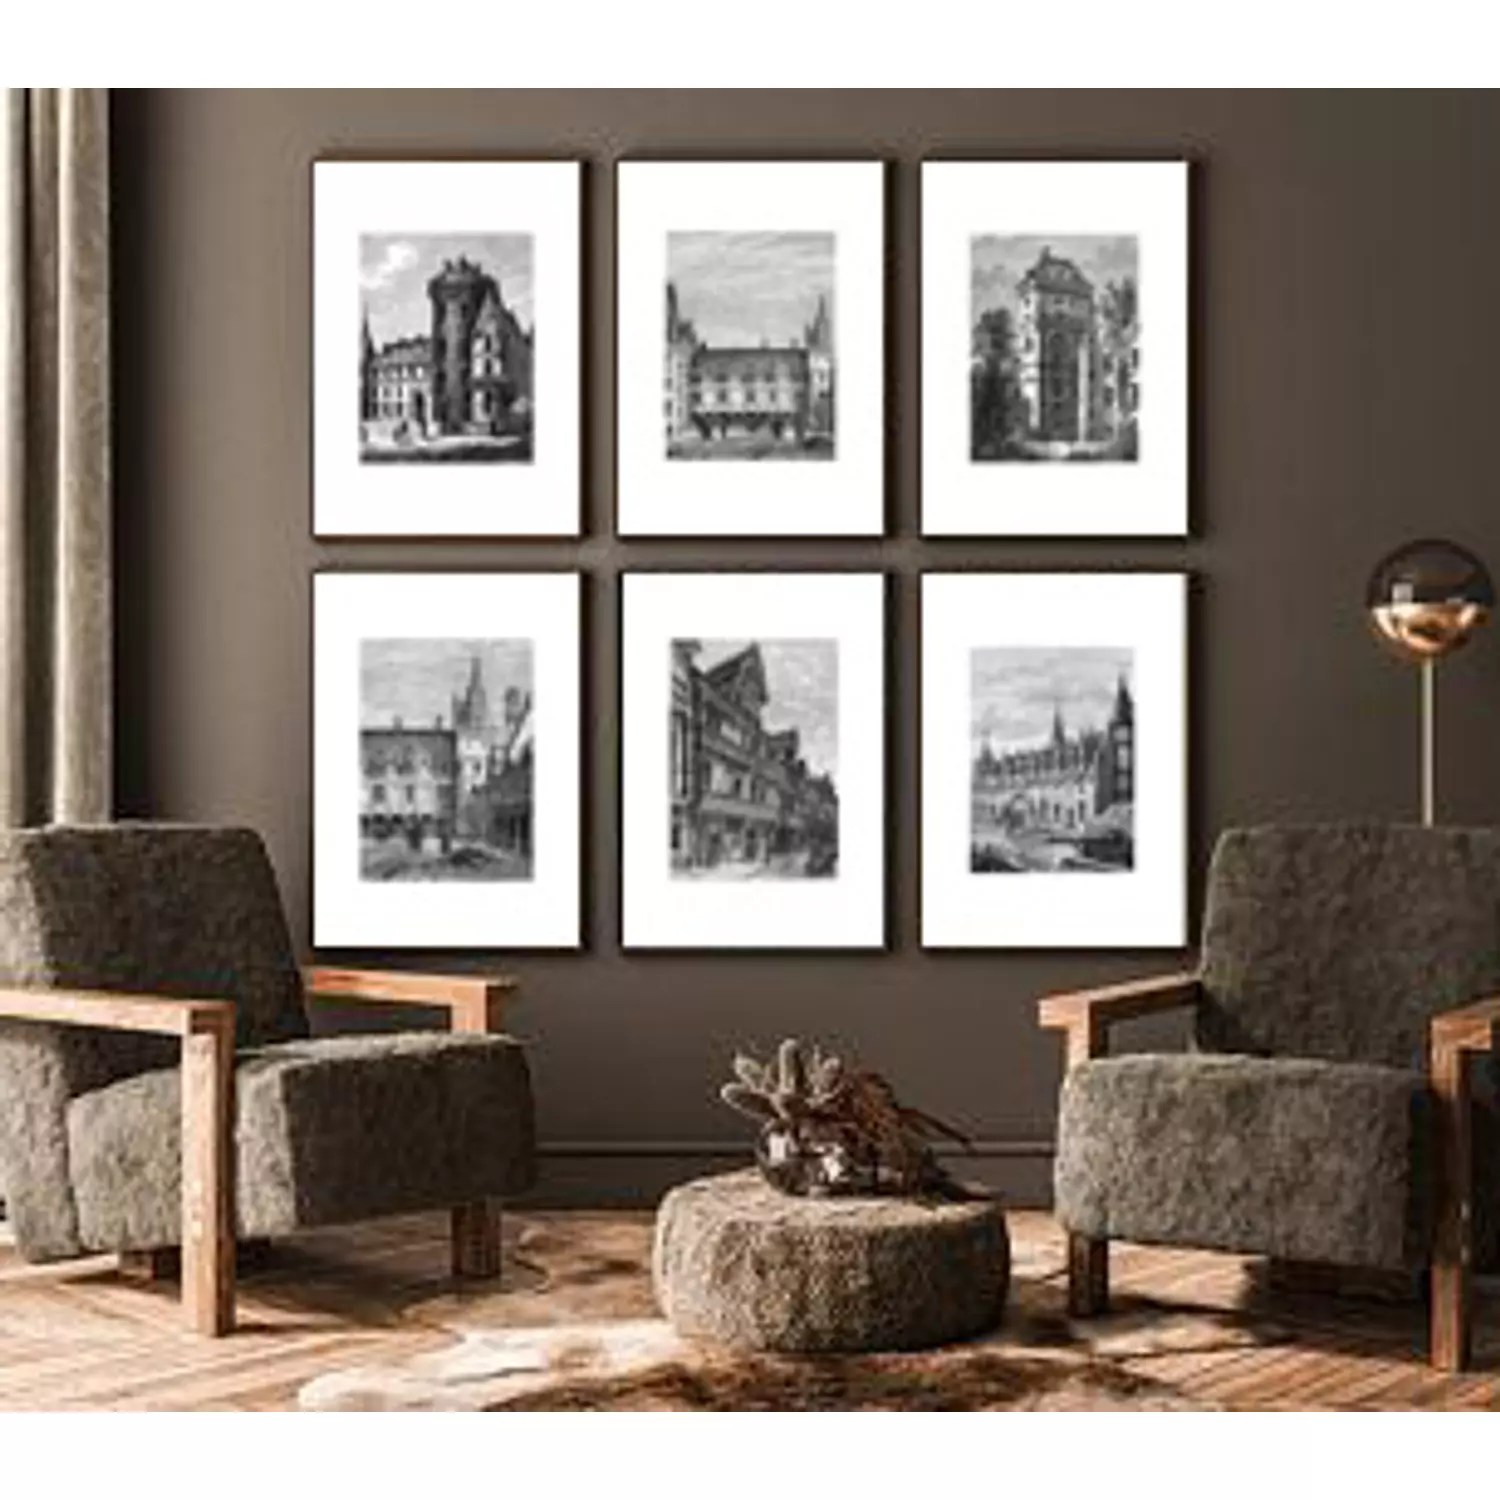 customized gallery wall PGGW20 hover image